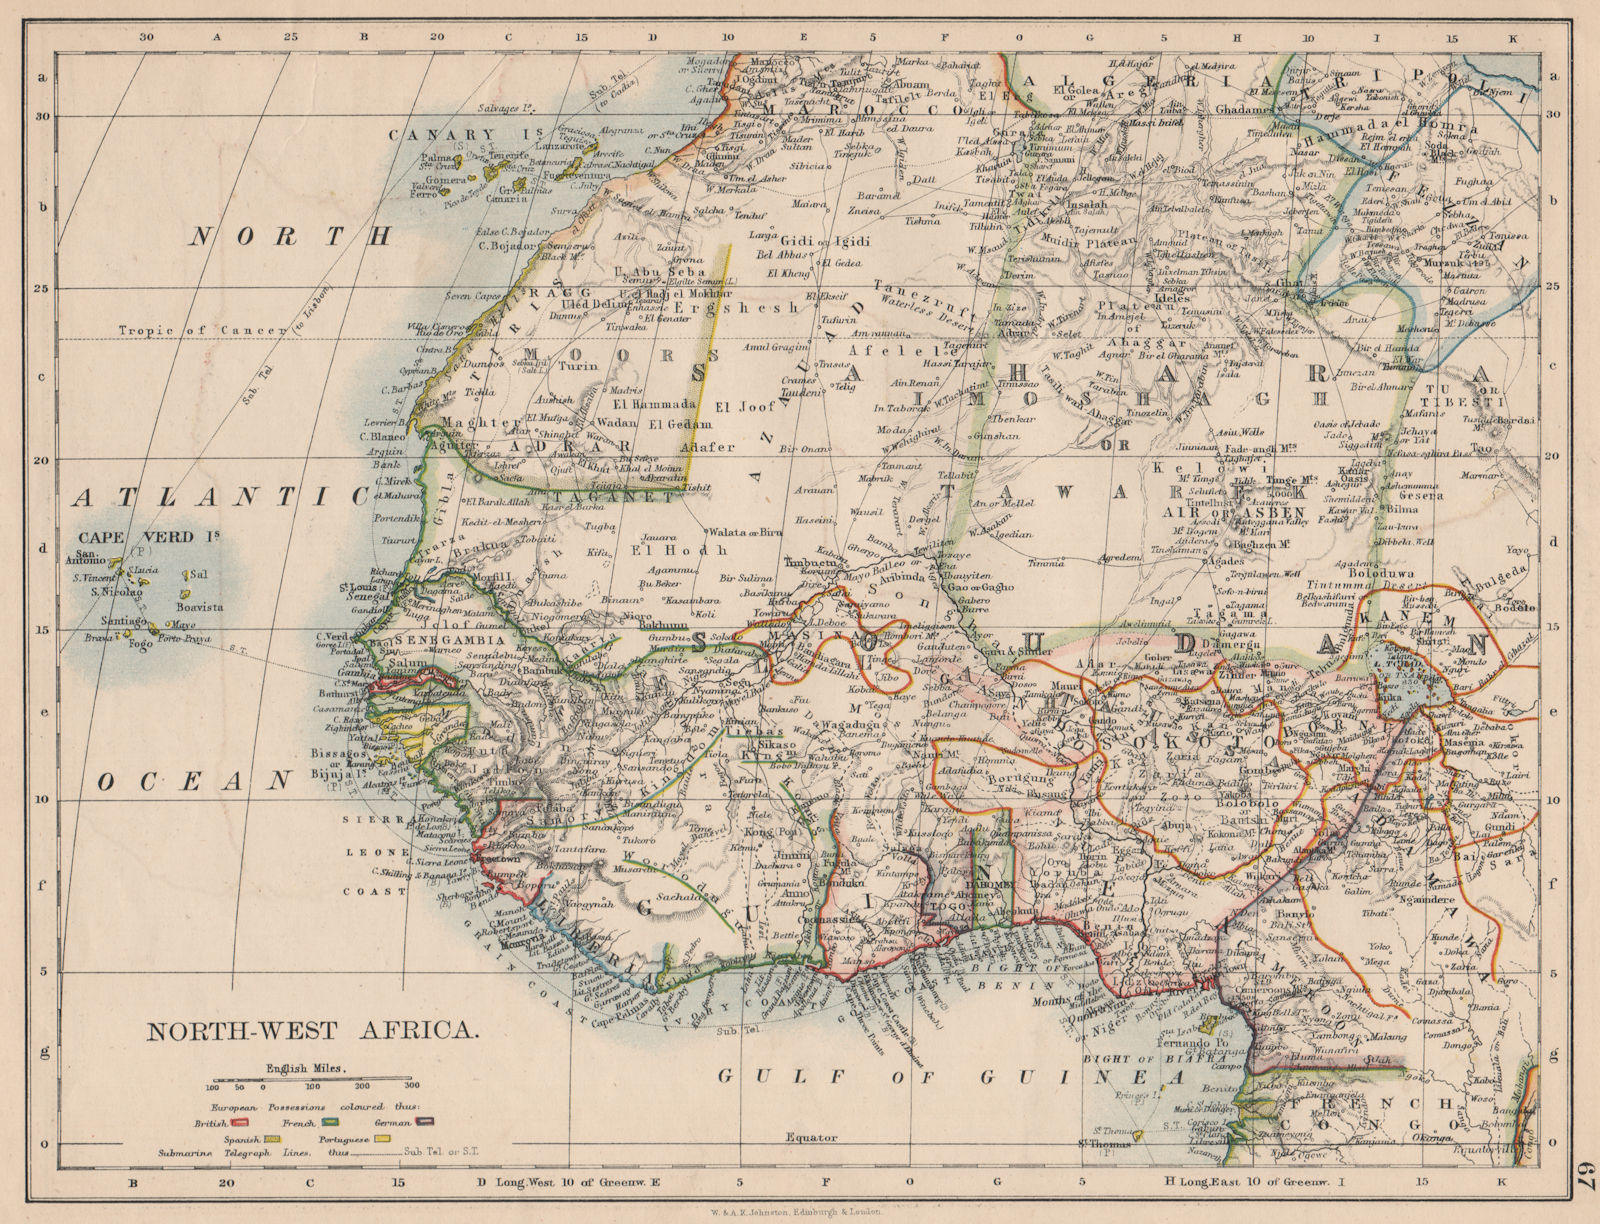 COLONIAL WEST AFRICA. Tribal areas. Caravan routes. Niger Coast Prot. 1895 map